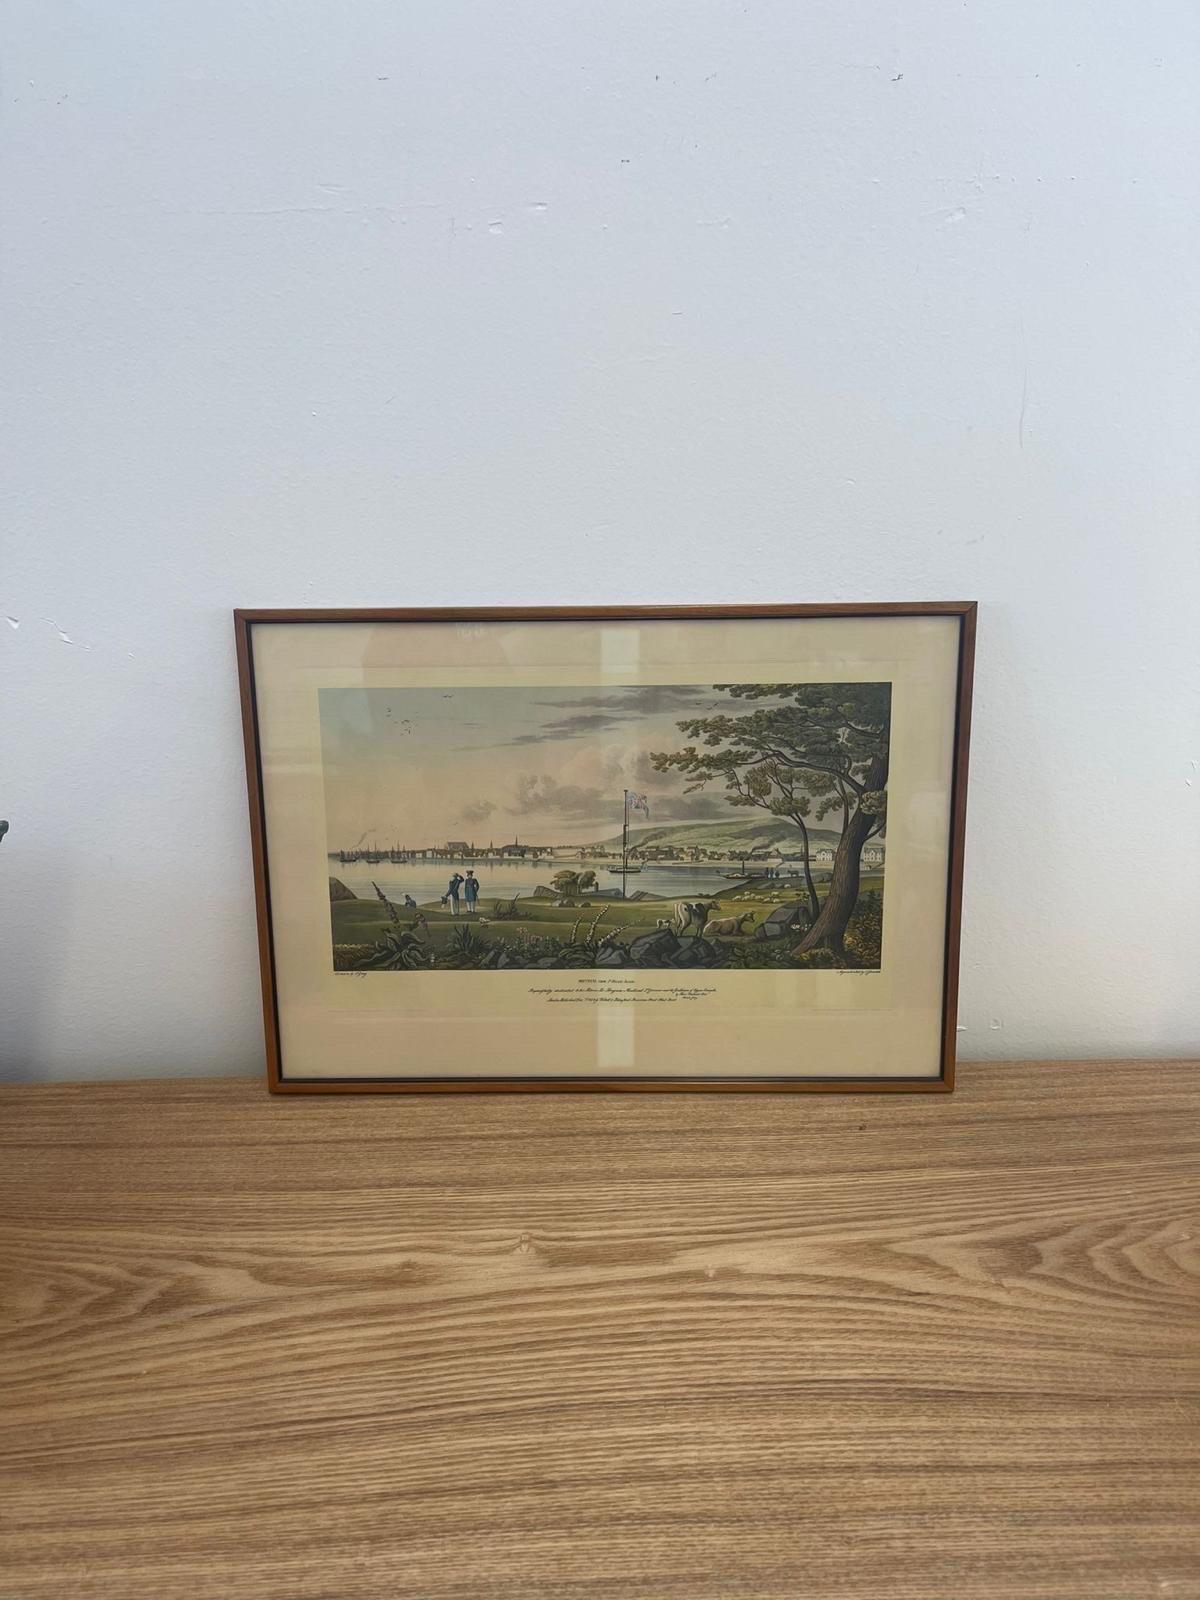 Dedication and information about this Print are included at the bottom of the frame. Two similar artwork are available through Separate listings. Vintage Condition Consistent with Age as Pictured.

Dimensions. 19 W ; 1/2 D ; 13 1/2 H